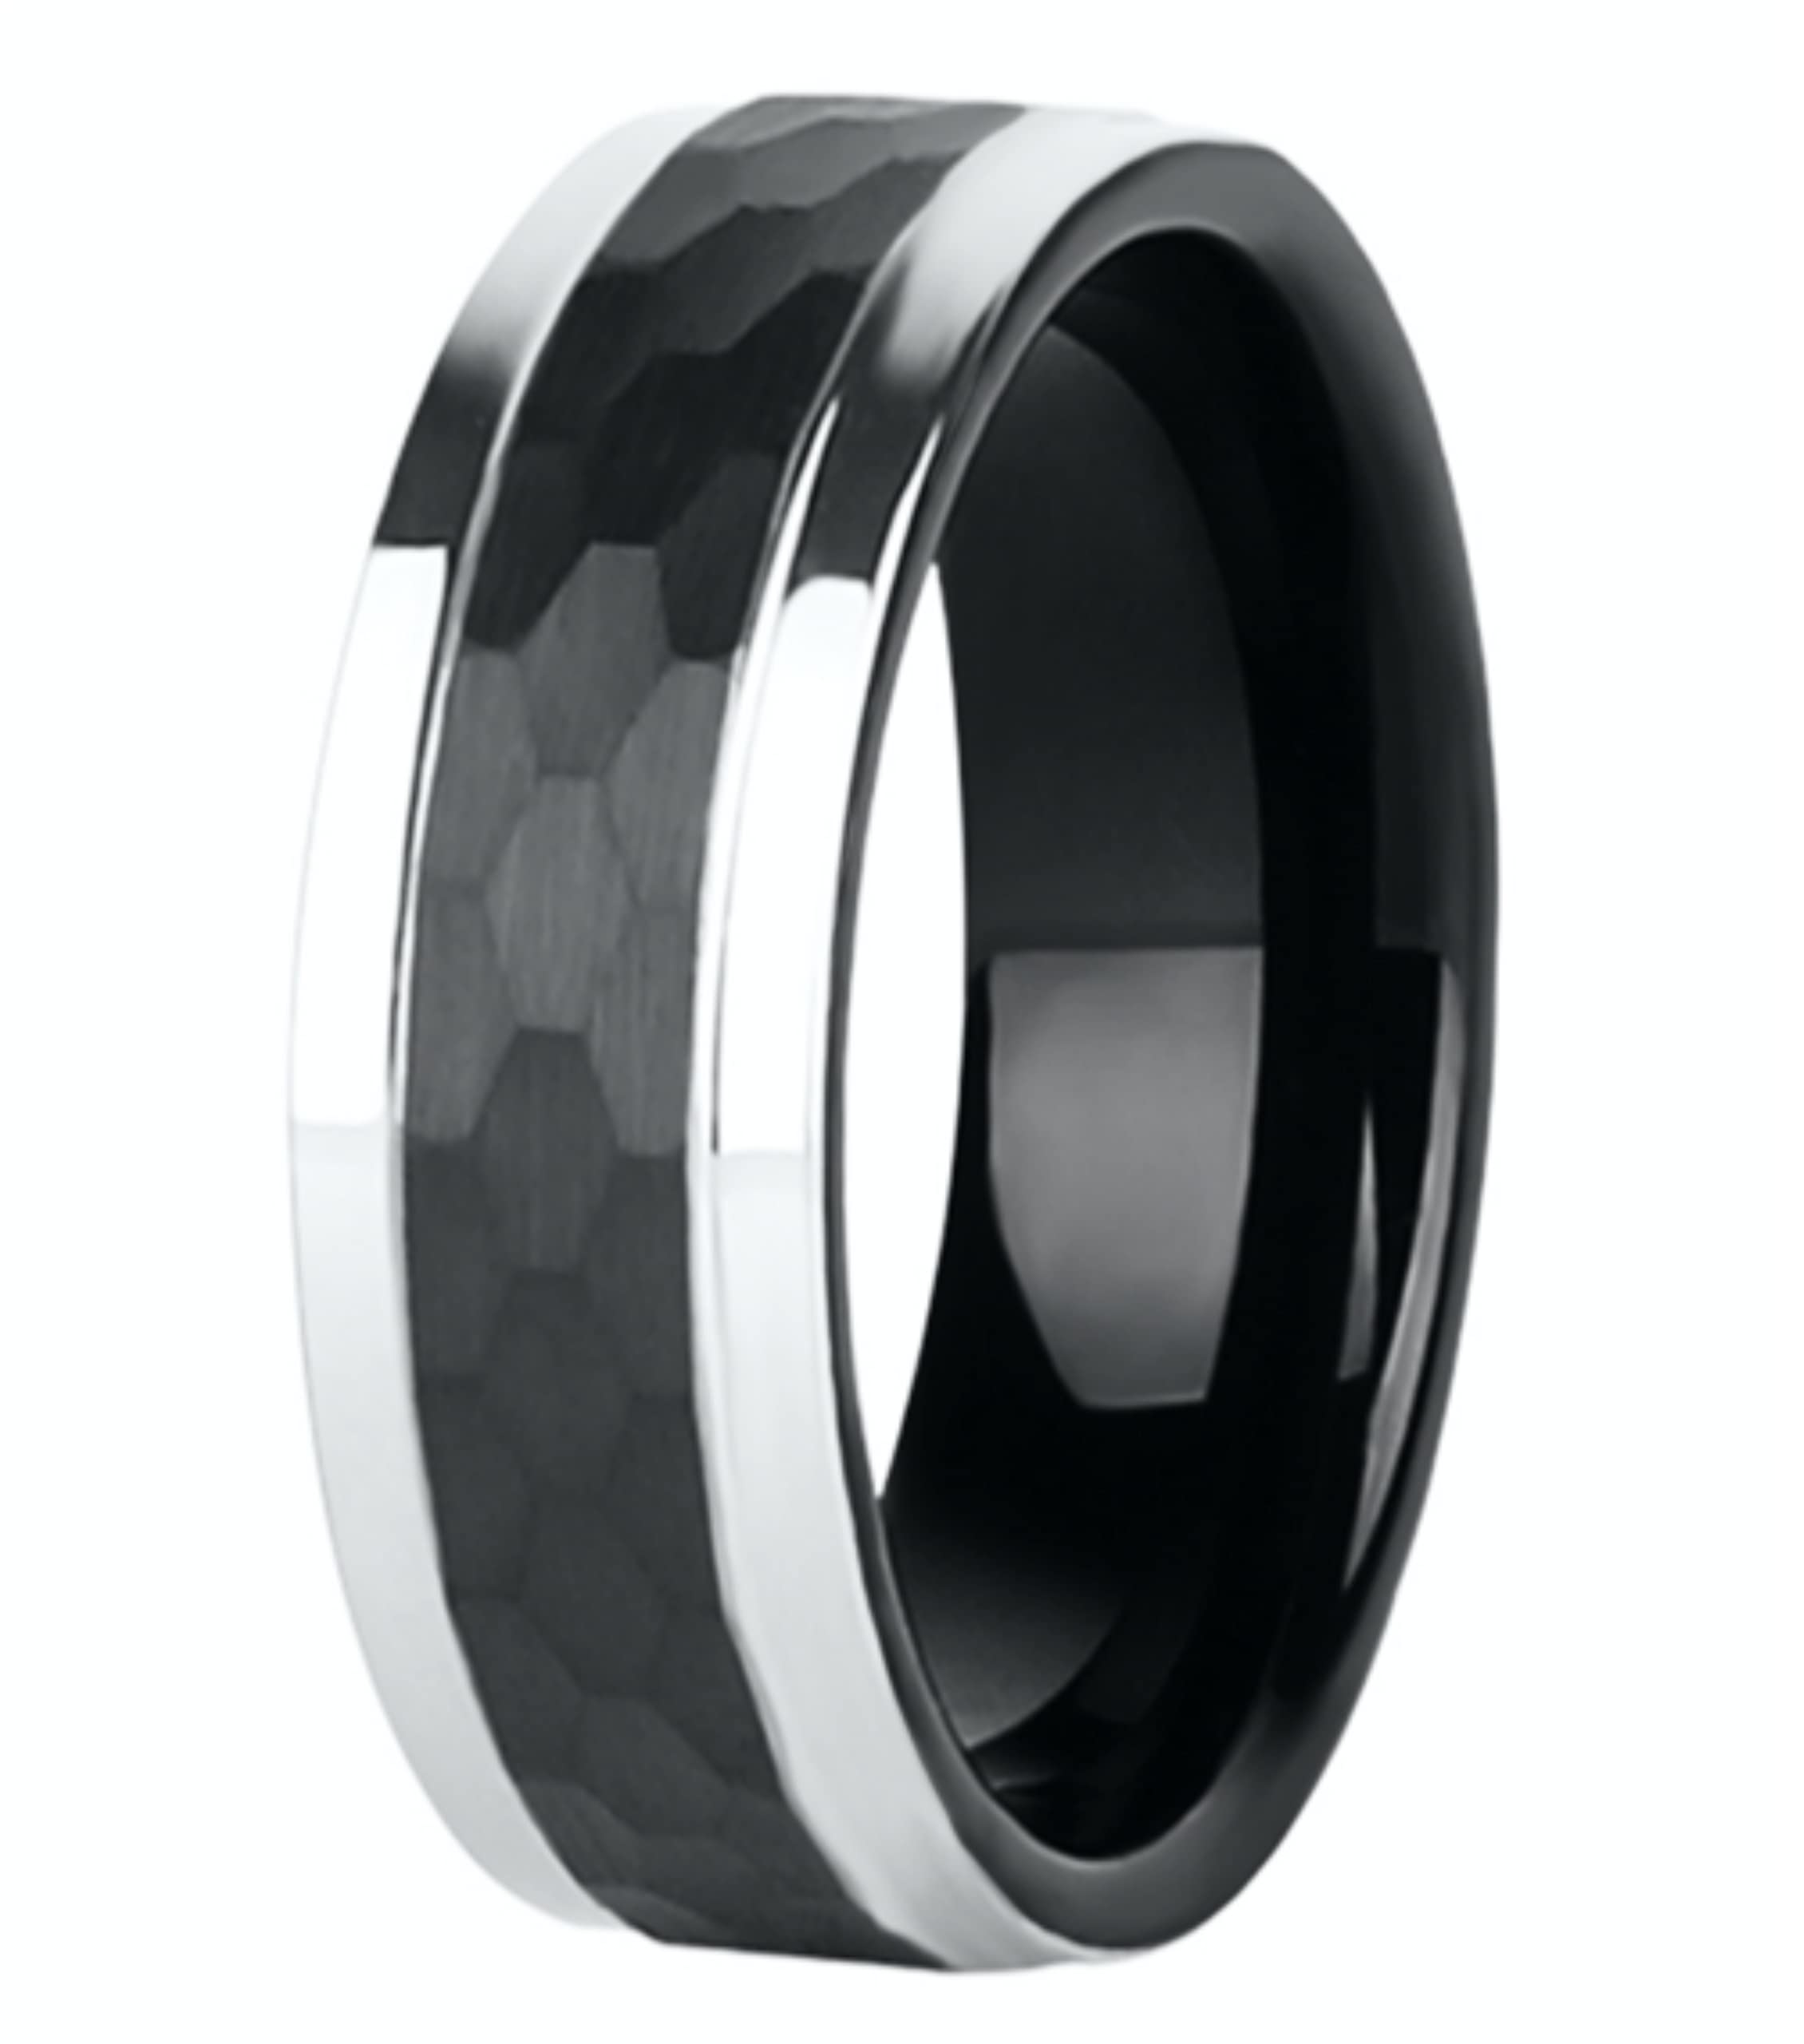 Nova Jewellery 8mm Tungsten Carbide Ring – Men's Wedding Ring with Coloured Textured centre and Brushed Surface – Scratch-Resistant and Sturdy Material – Modern and Minimalist Ring